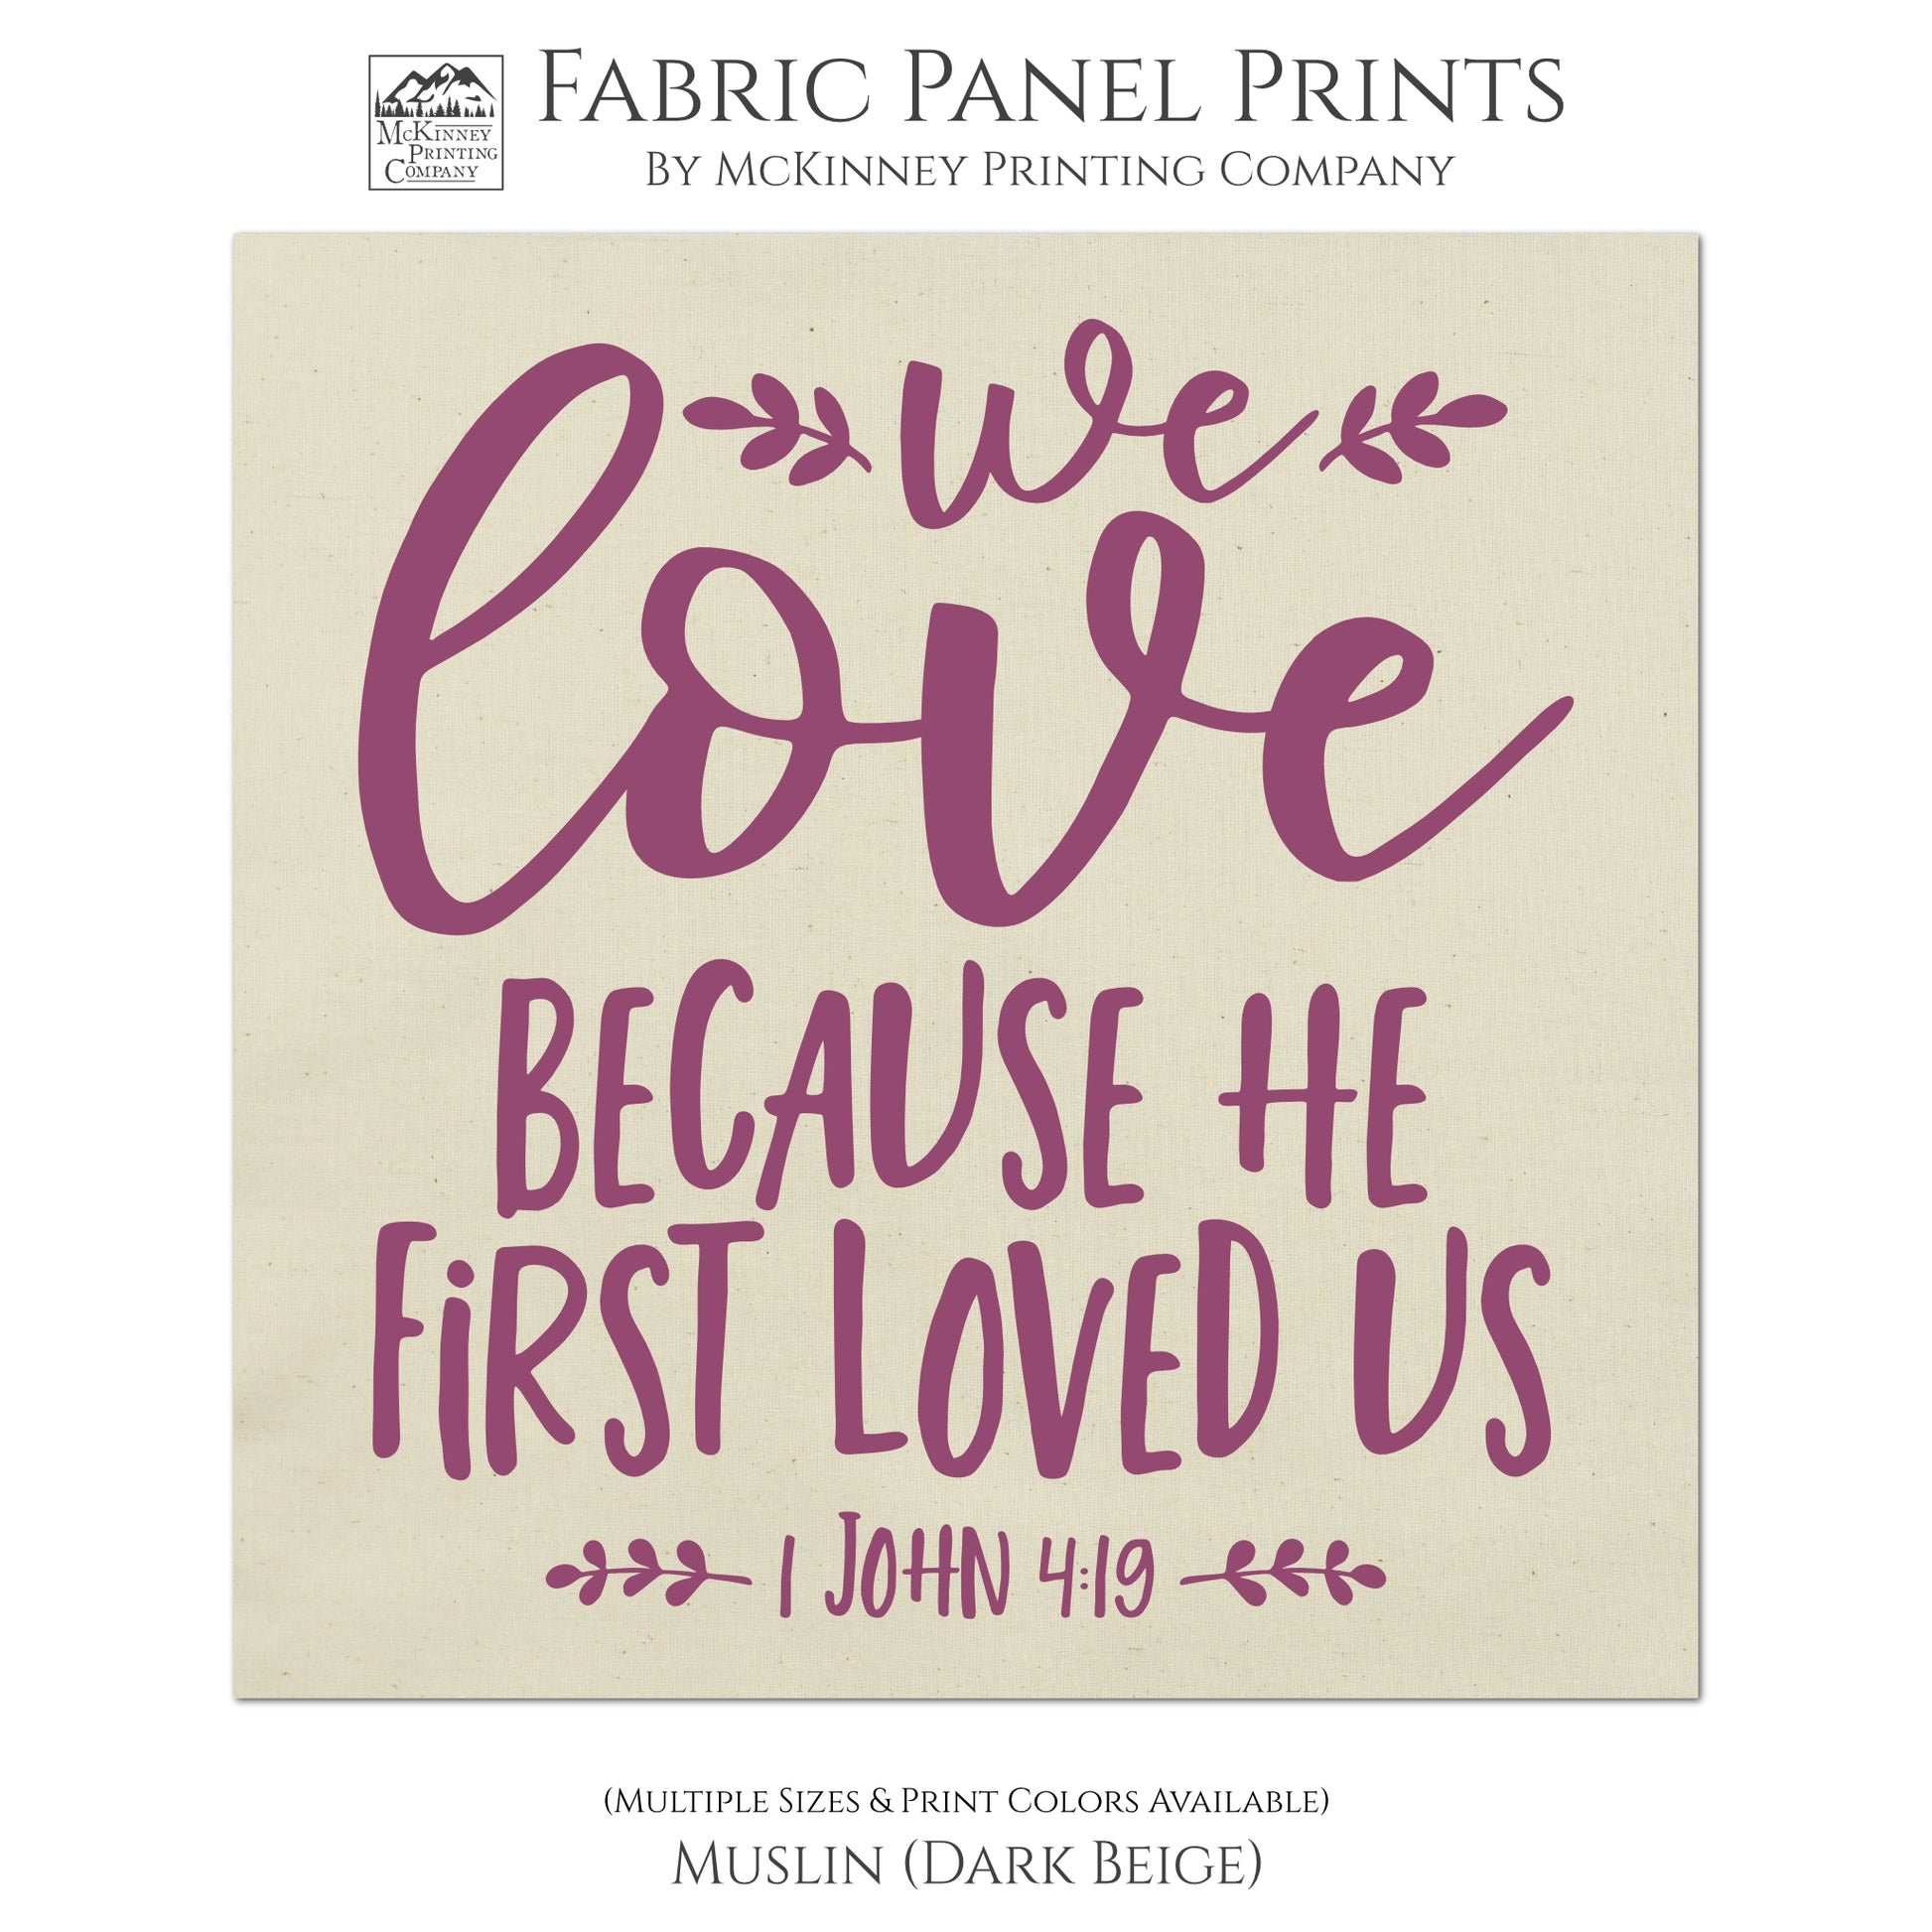 1 John 4:19, We love because he first loved us - Fabric Panel Print for Quilting, Sewing or Wall Art - Muslin